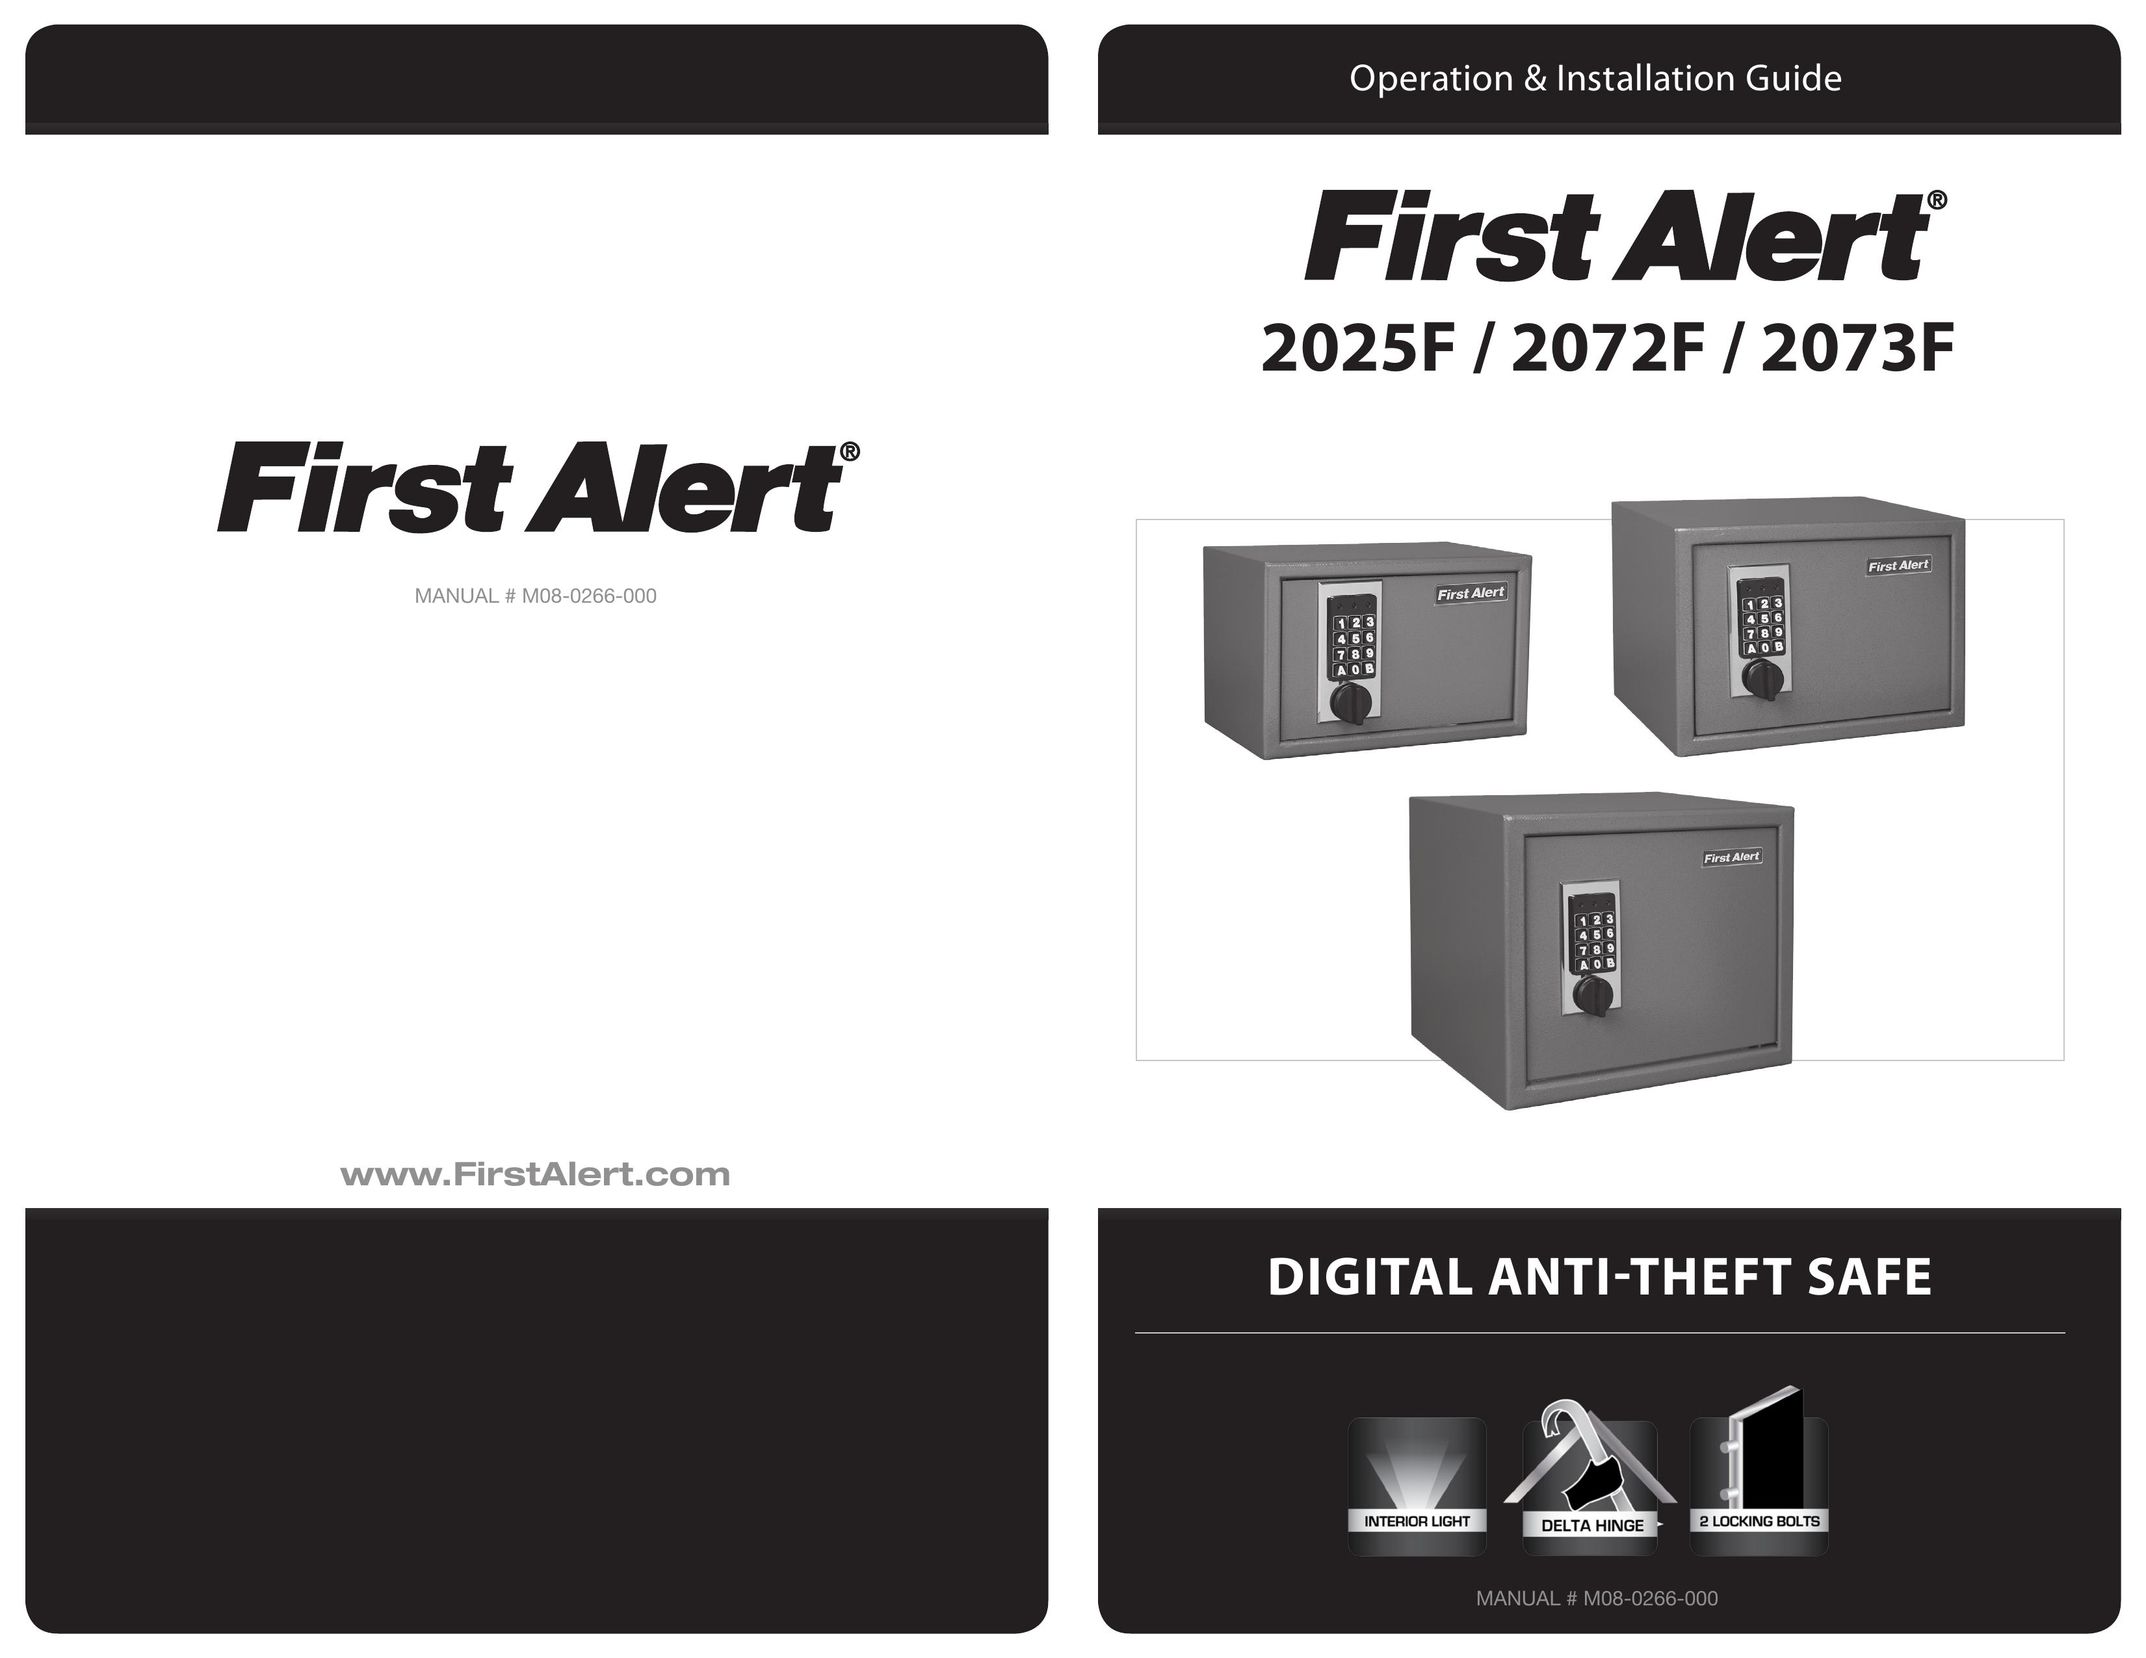 First Alert 2025F Home Safety Product User Manual